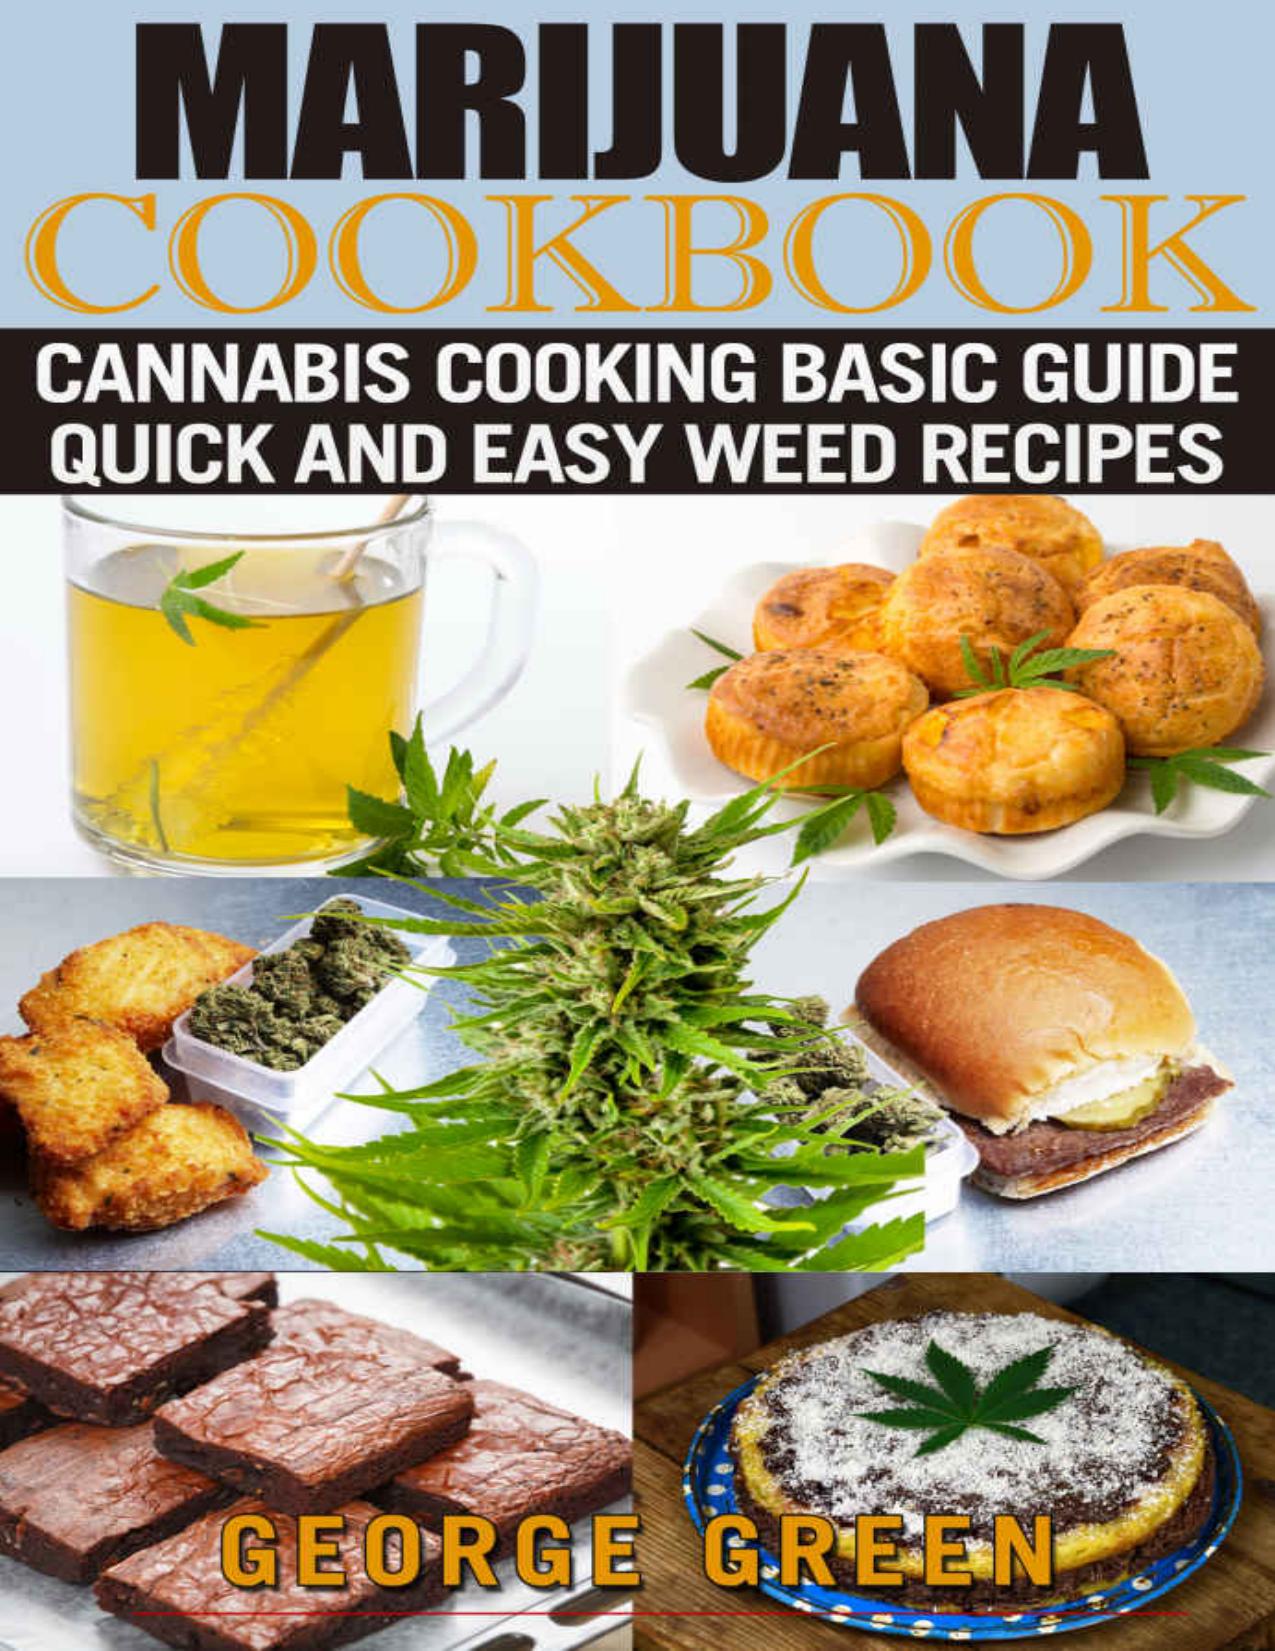 Marijuana Cookbook: Cannabis Cooking Basic Guide - Quick and Easy Weed Recipes (Cooking with Weed) by George Green